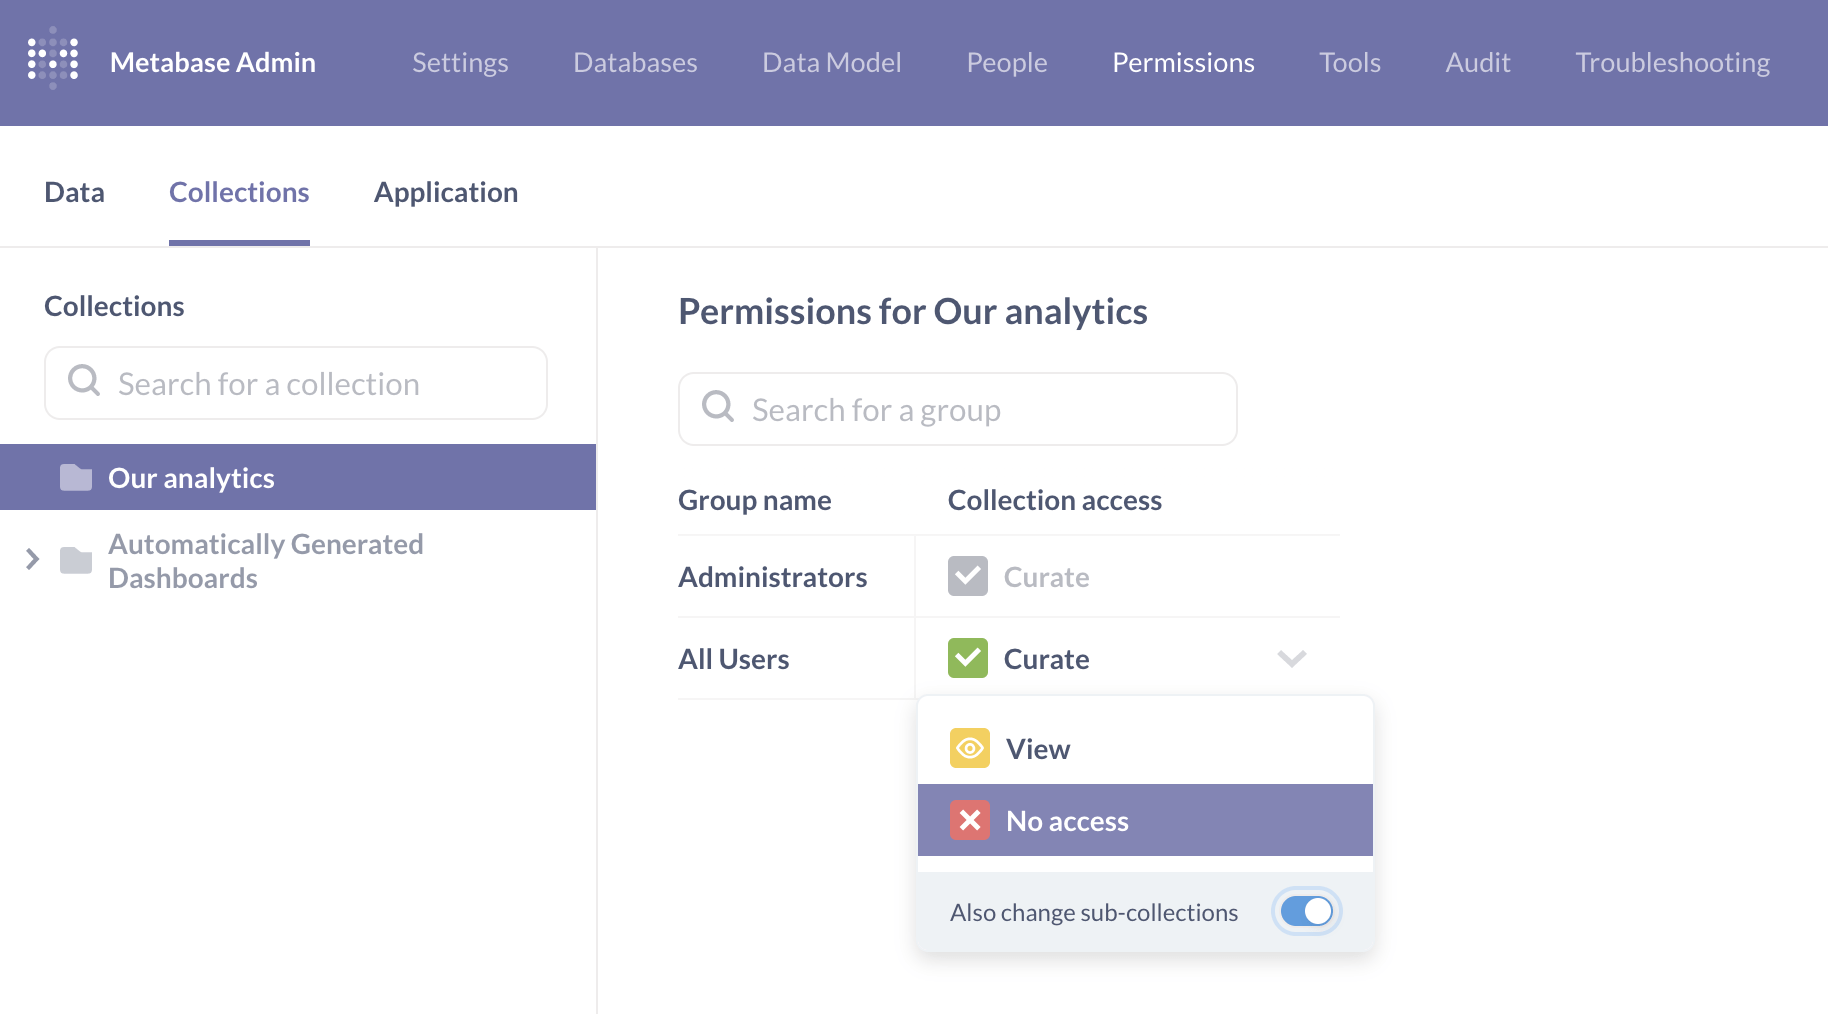 Revoking All Users access to the Our analytics collection and its sub-collections.